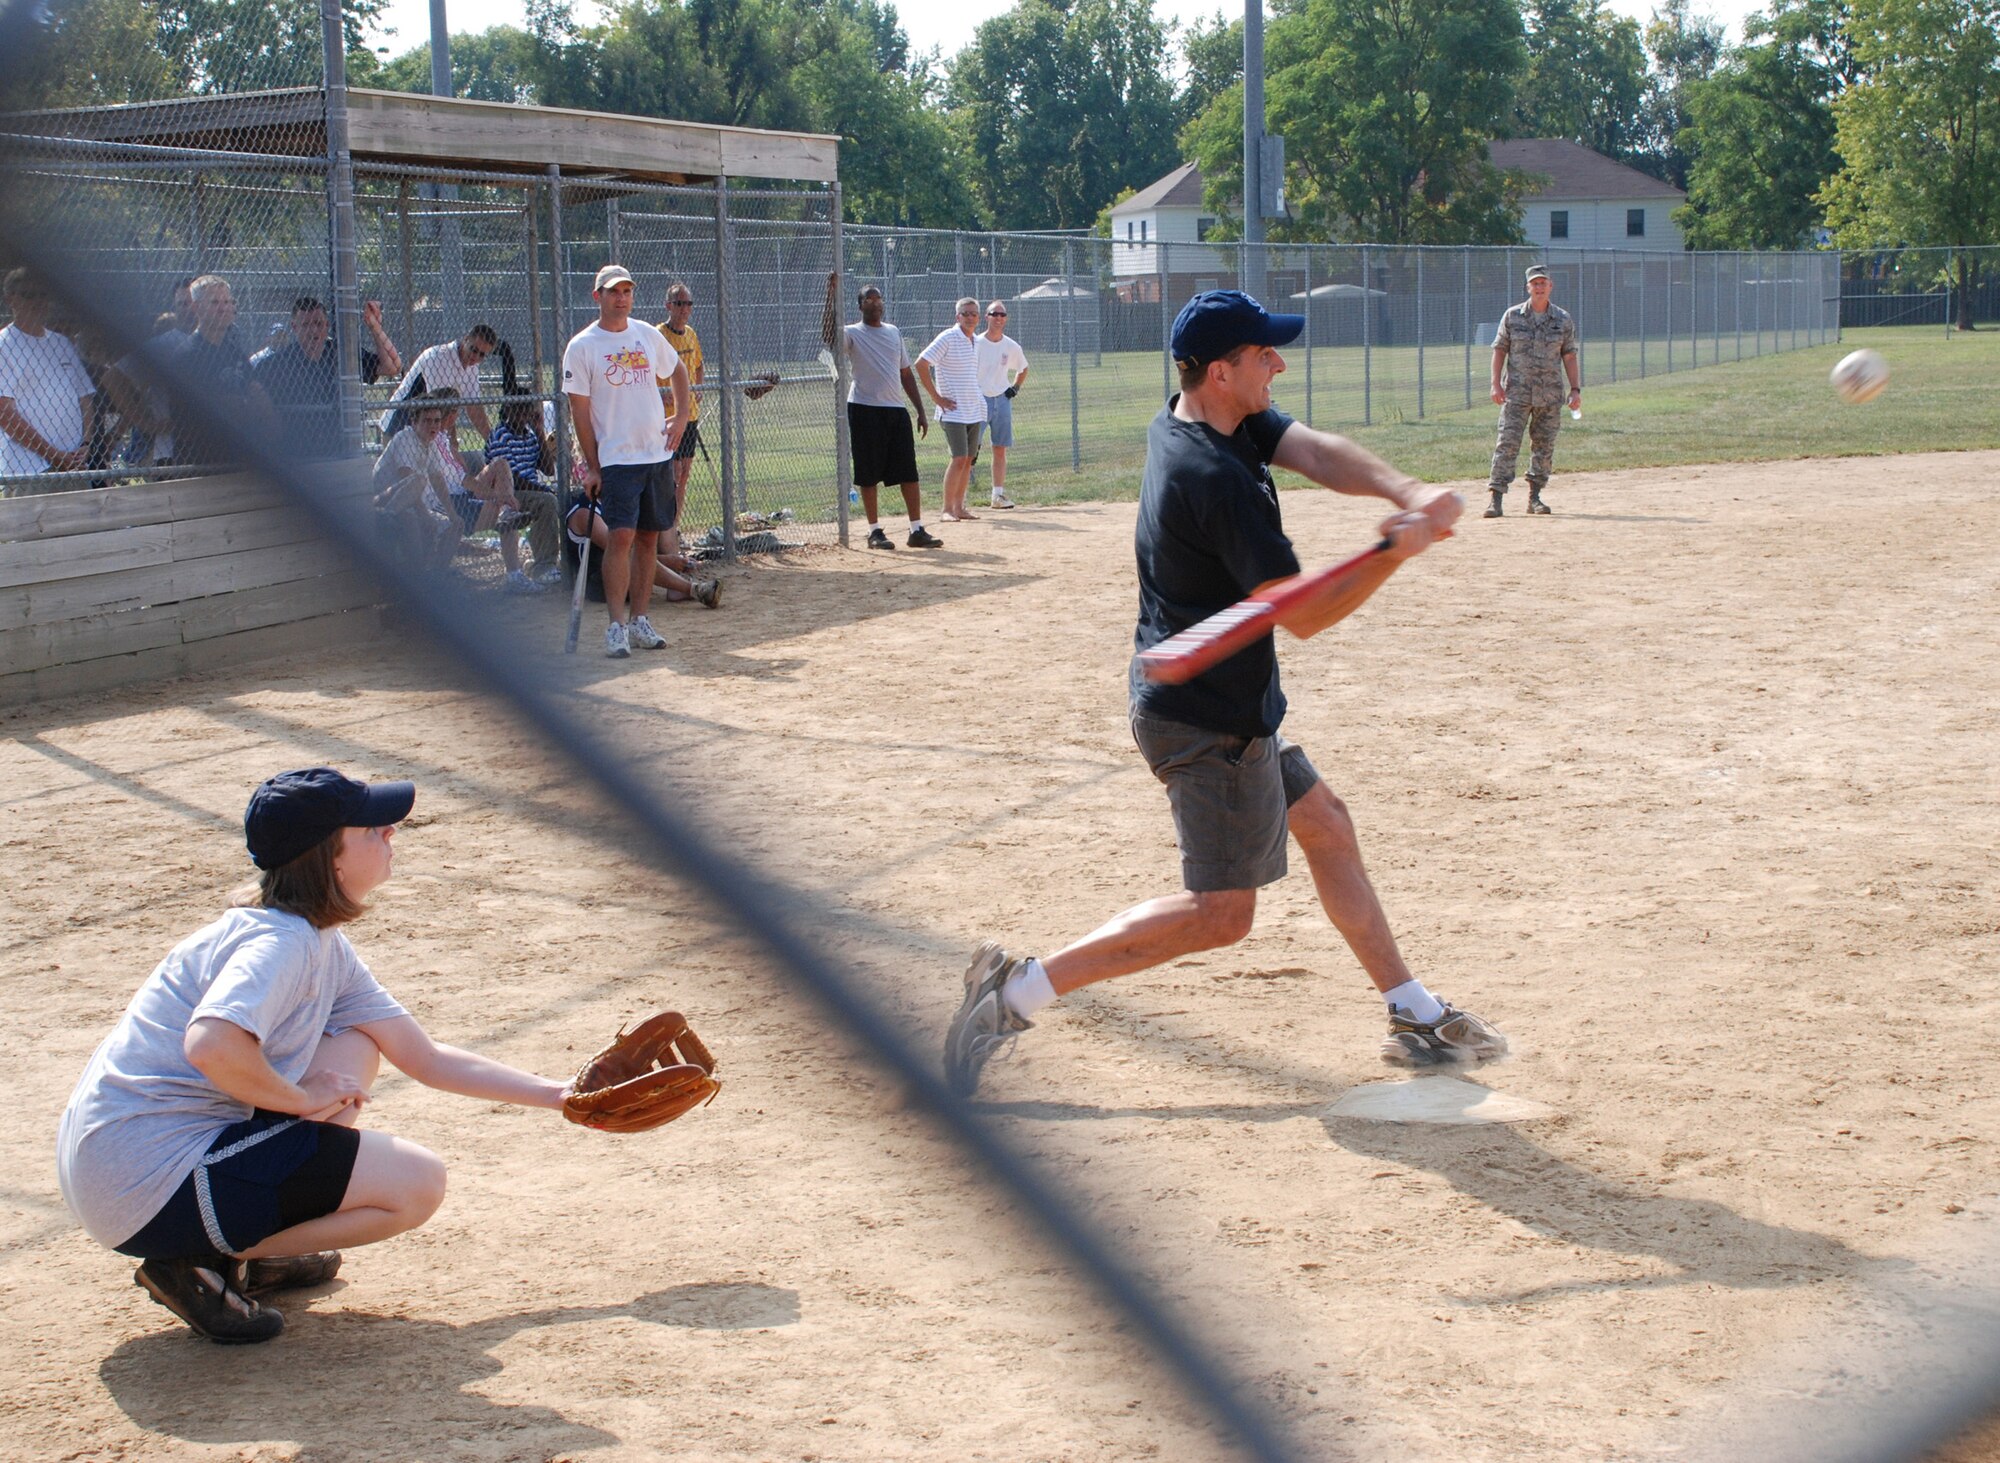 Hey there batter!  An officer of the 932nd Airlift Wing prepares to whack at the first pitch at the recent softball match.